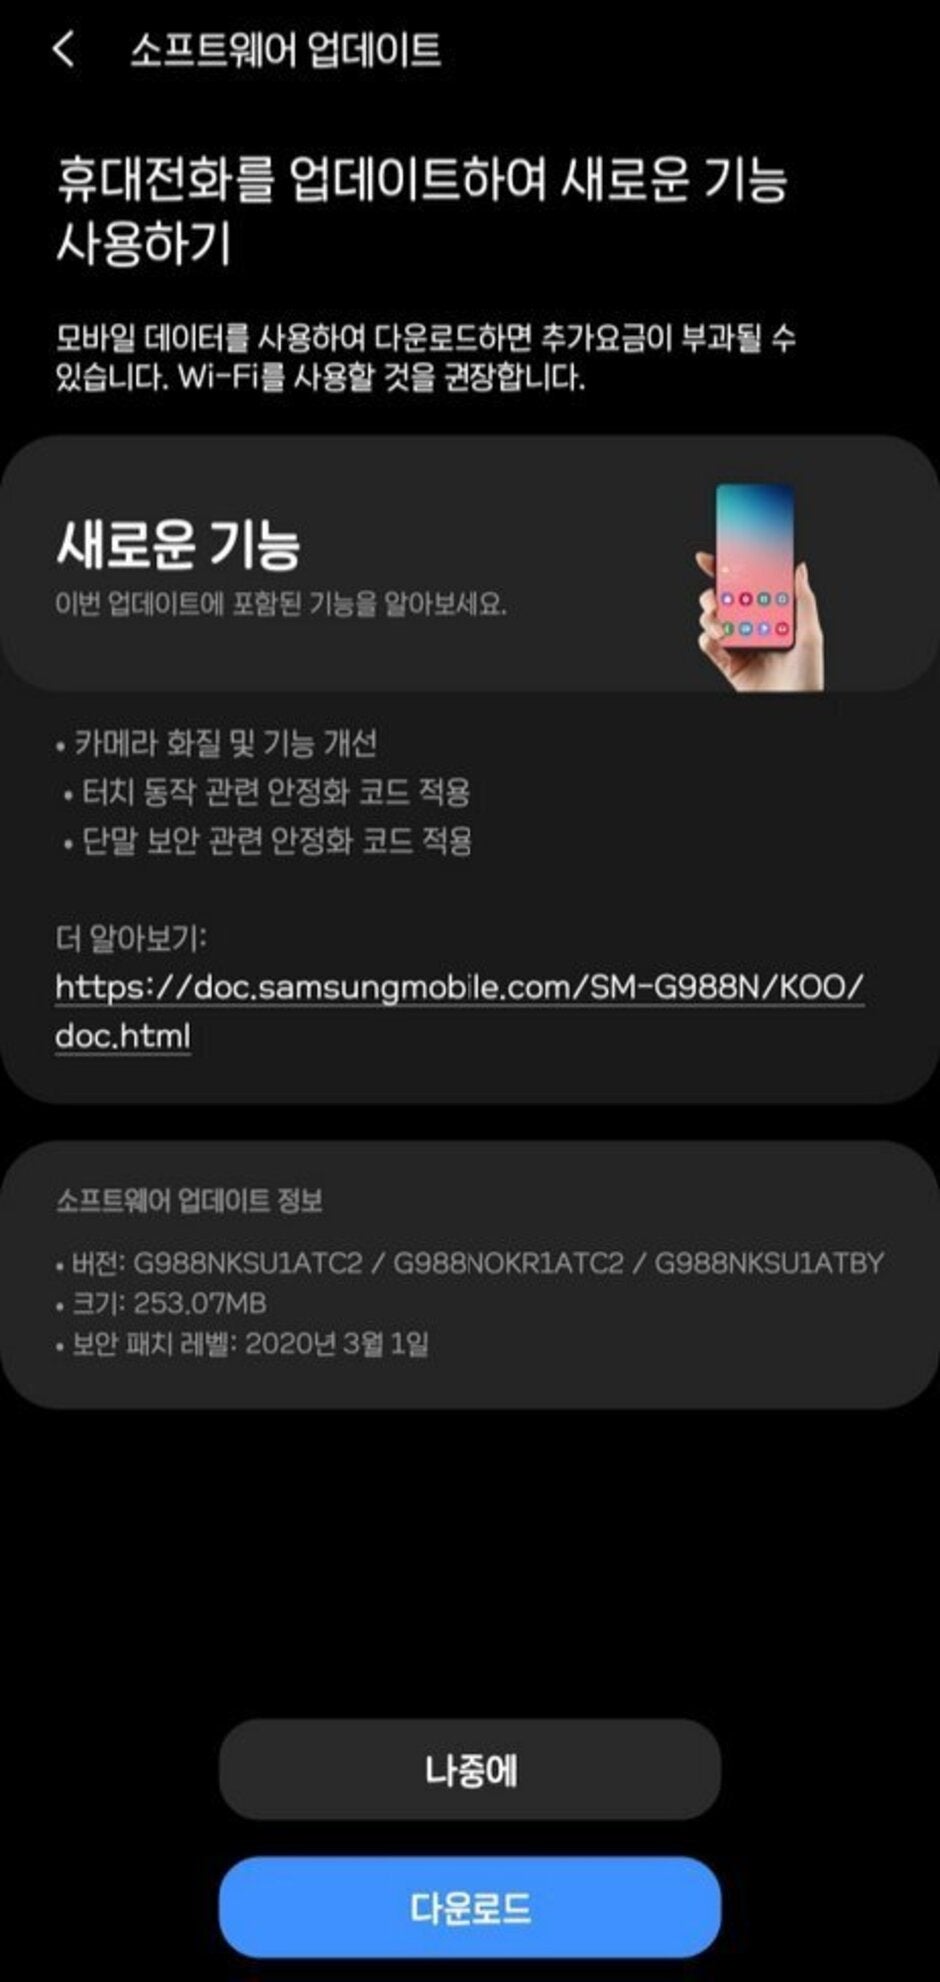 Samsung starts rolling out camera update for Galaxy S20 series